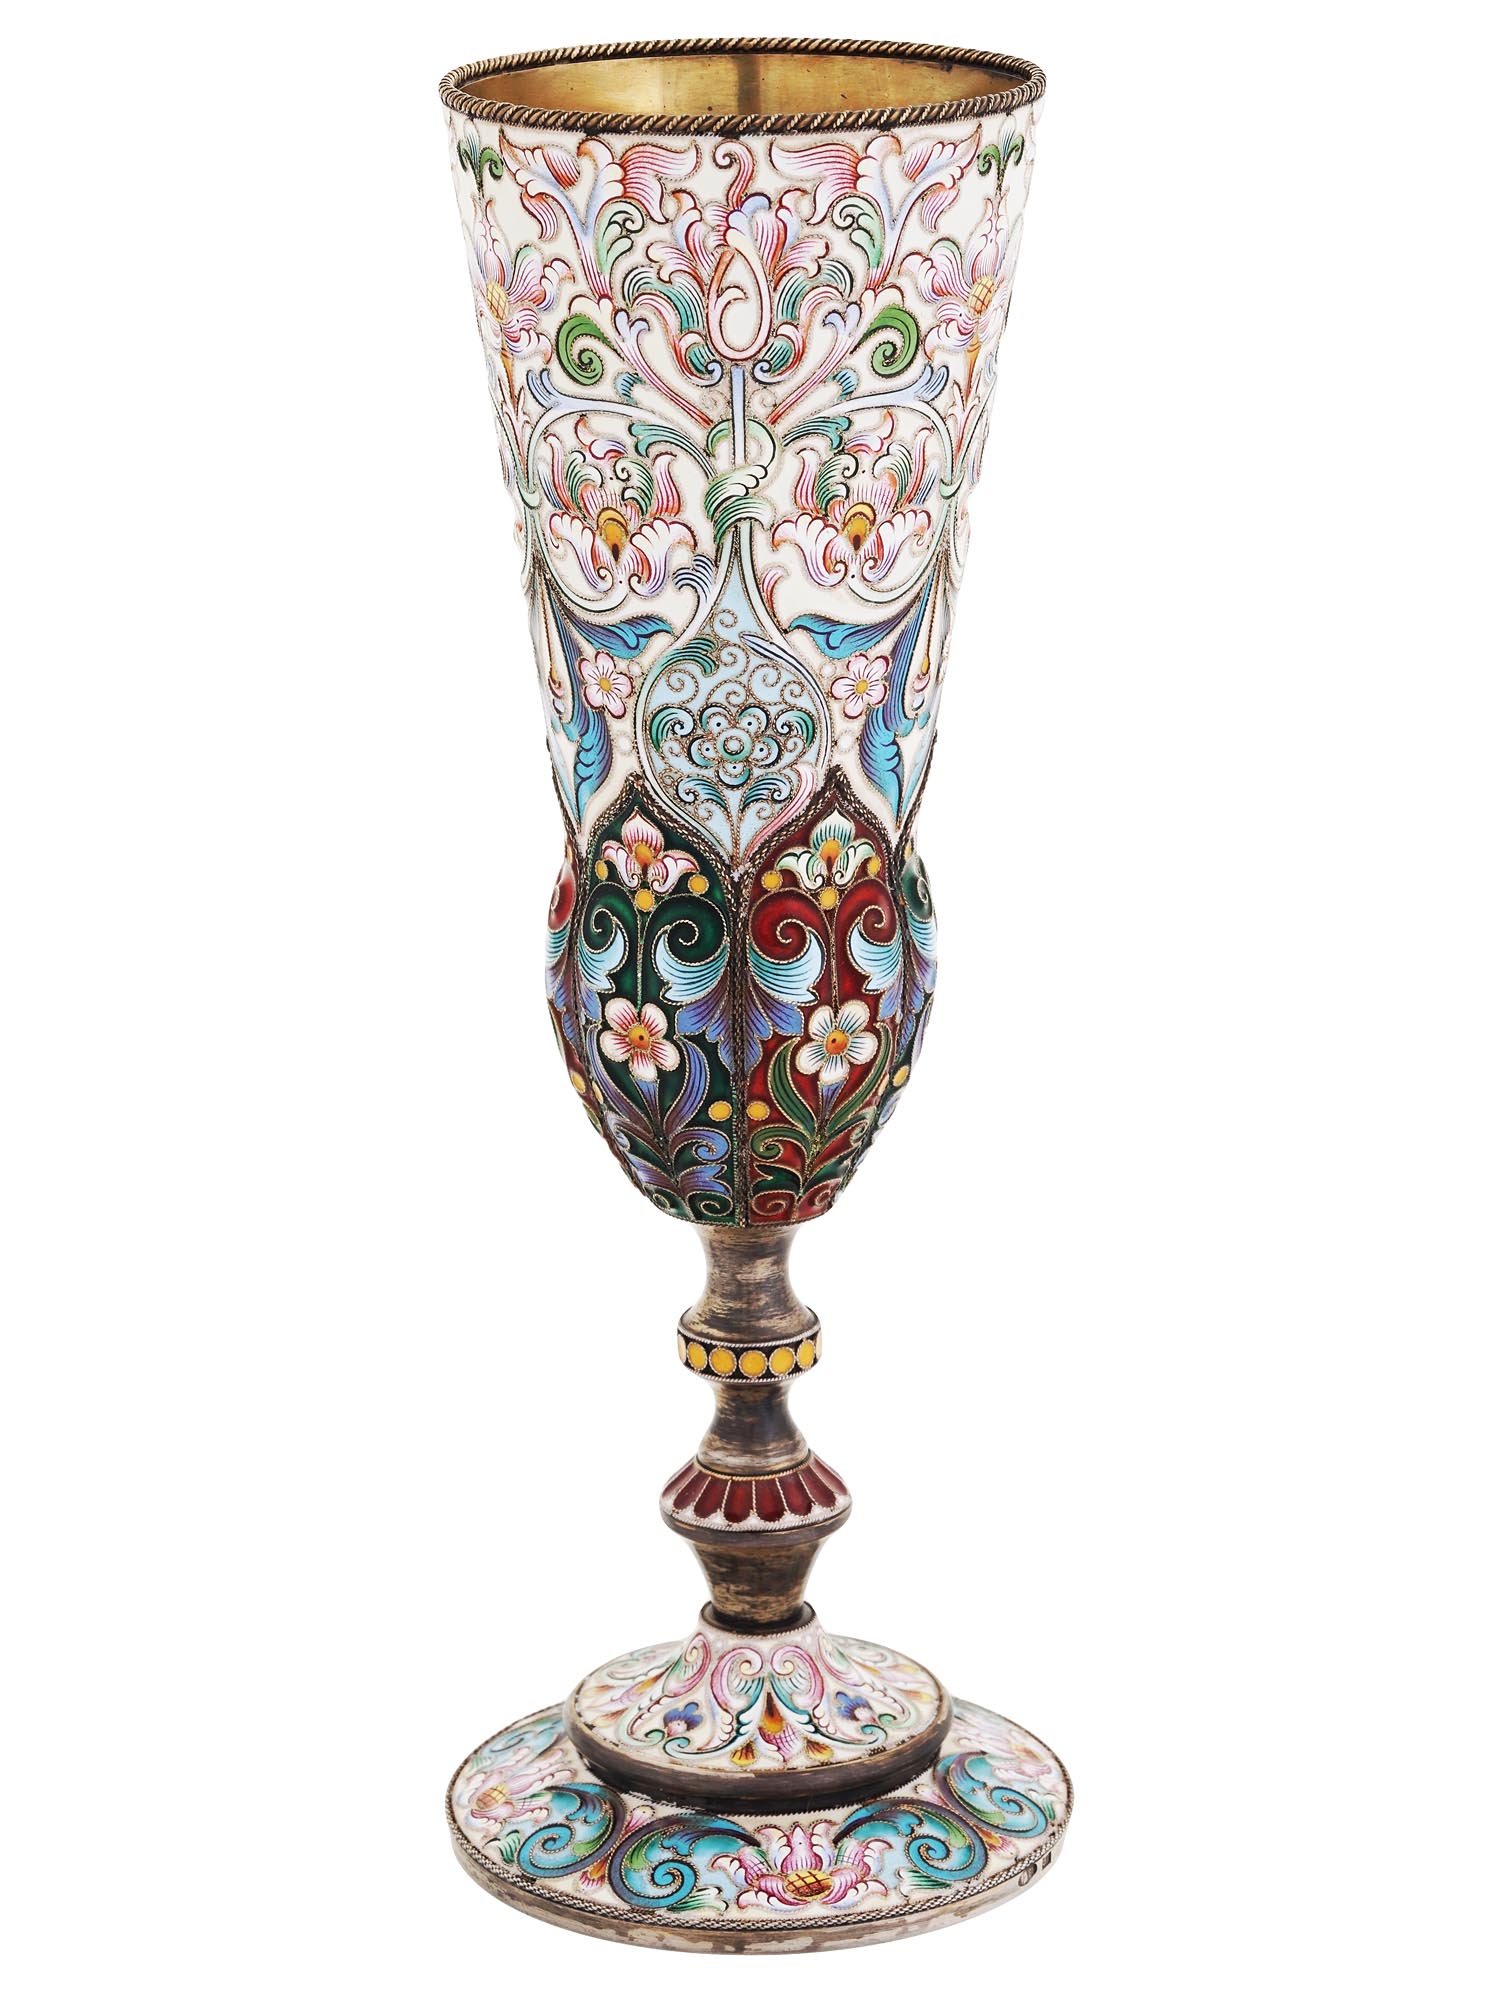 TALL RUSSIAN 88 SILVER CLOISONNE ENAMEL GOBLET PIC-1